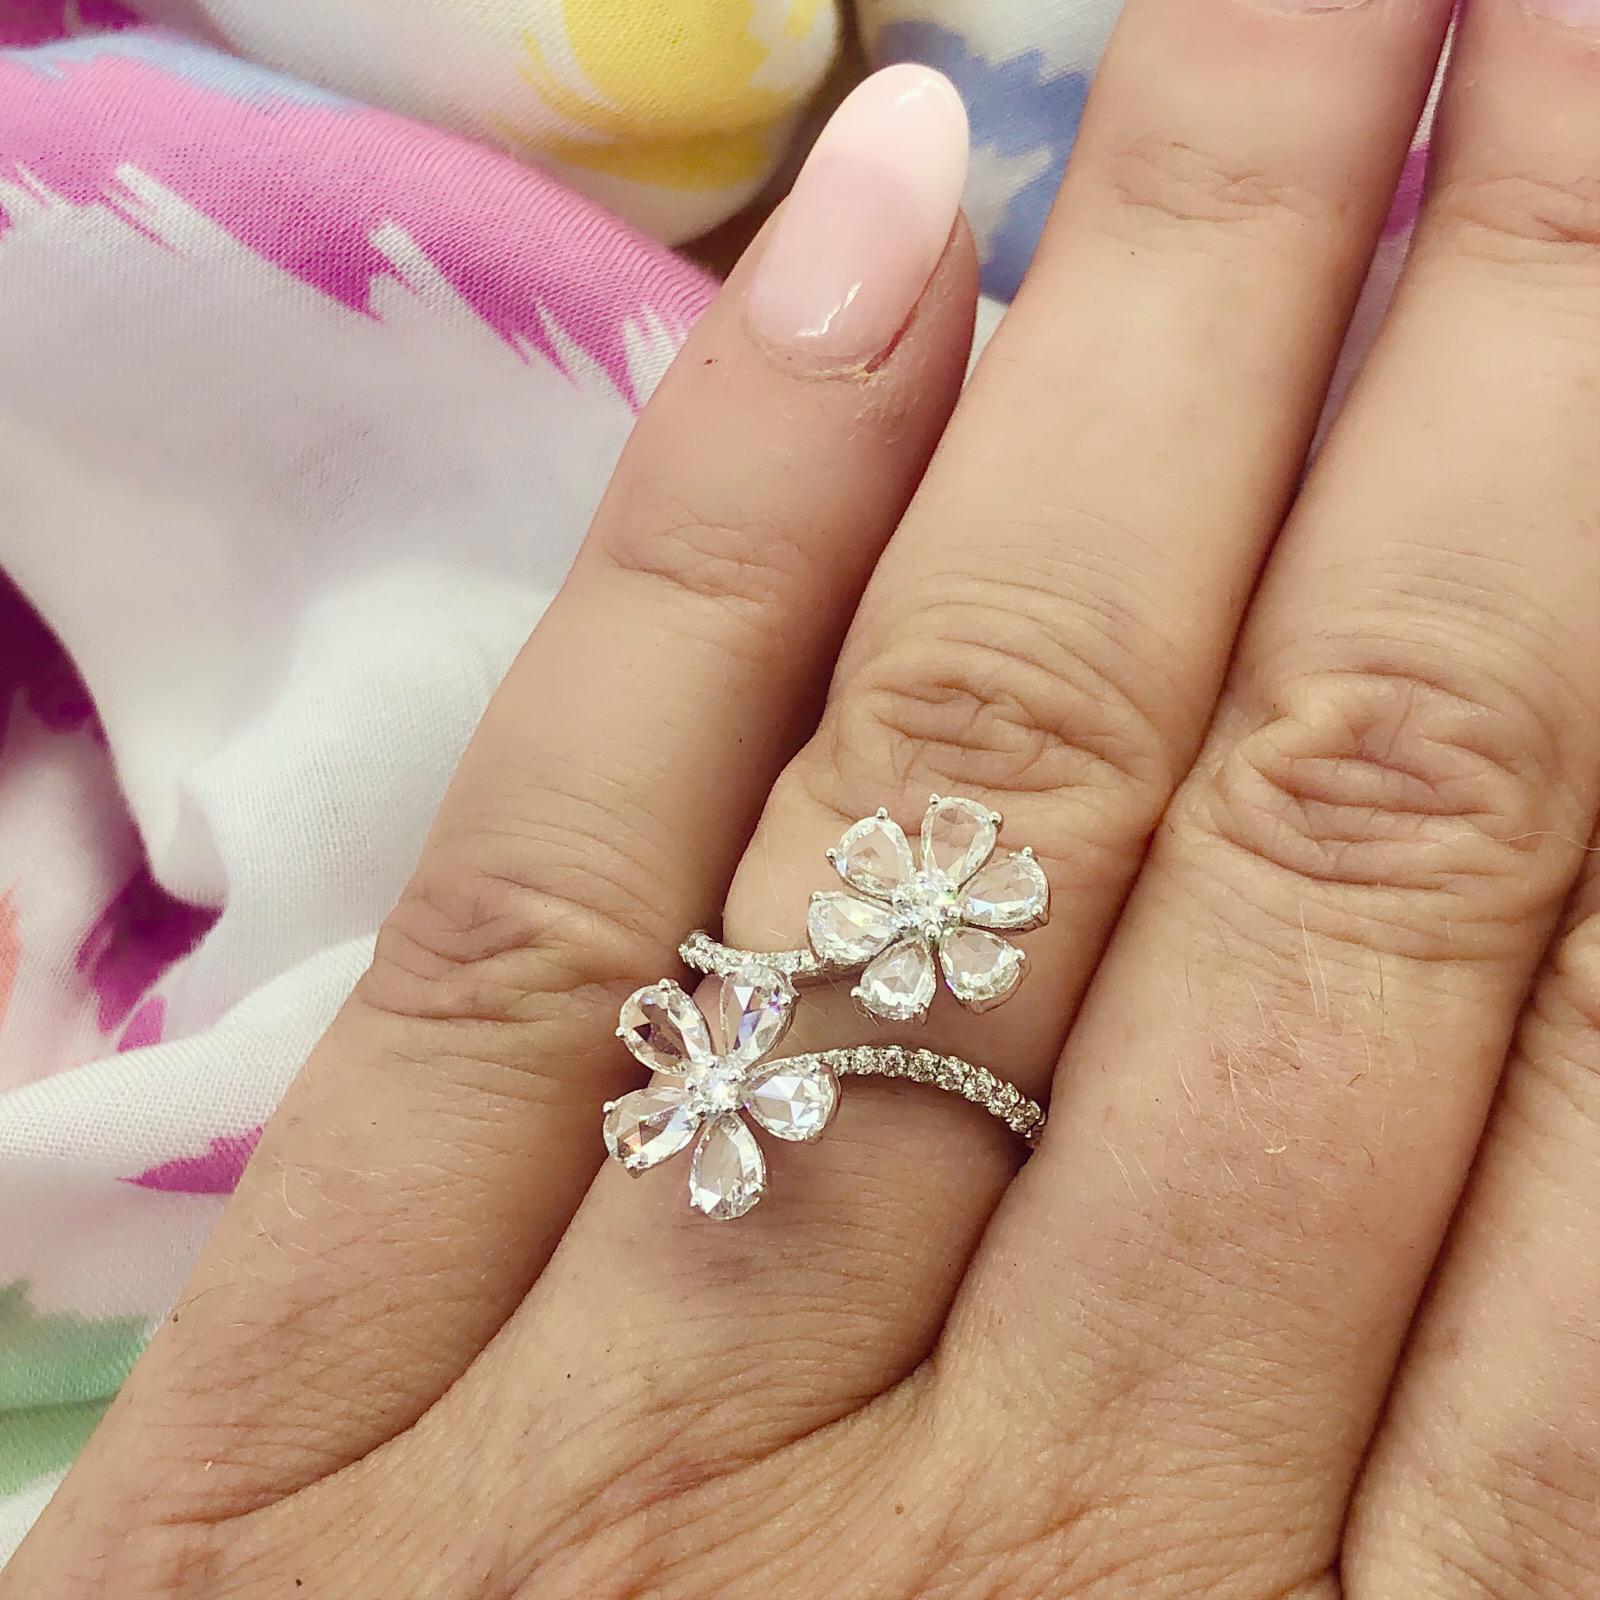 Delicate yet bold, this 18k white gold by-pass ring is charming and unique. Designed with two flowers, featuring pear-shaped rose-cut diamond petals, and round-brilliant-cut set stems creating the band. The total diamond weight is 1.84 carats. The